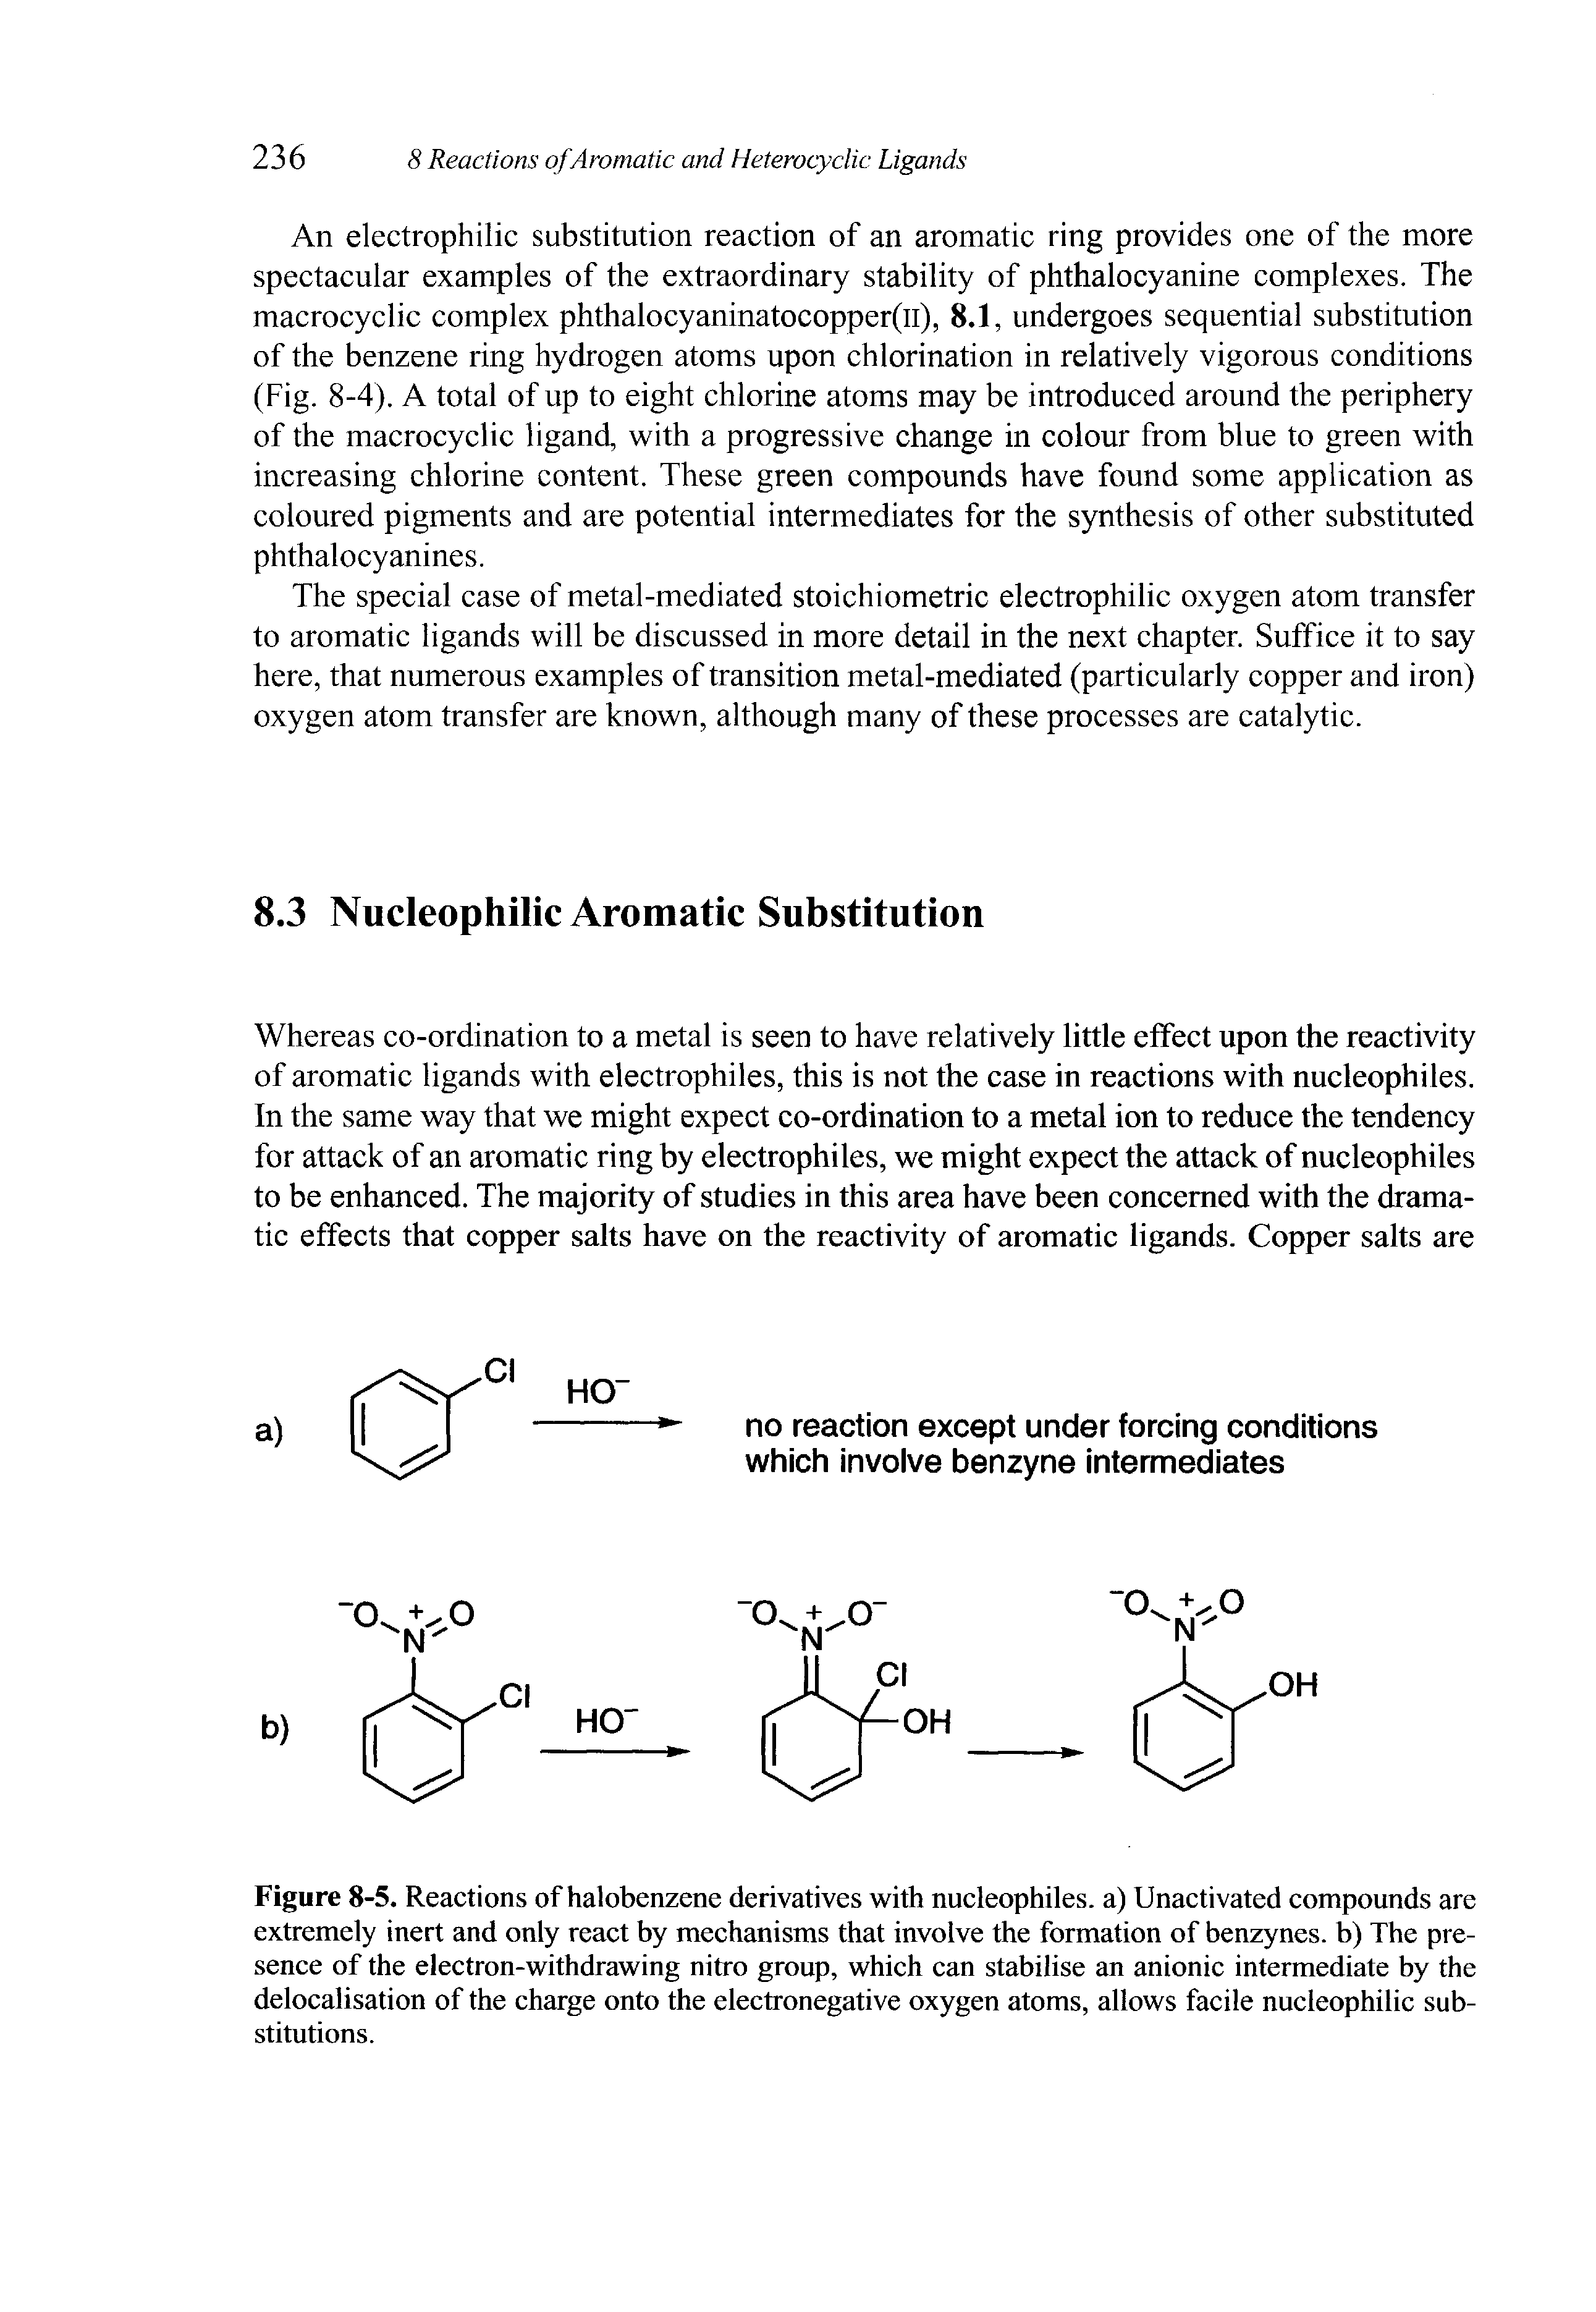 Figure 8-5. Reactions of halobenzene derivatives with nucleophiles, a) Unactivated compounds are extremely inert and only react by mechanisms that involve the formation of benzynes. b) The presence of the electron-withdrawing nitro group, which can stabilise an anionic intermediate by the delocalisation of the charge onto the electronegative oxygen atoms, allows facile nucleophilic substitutions.